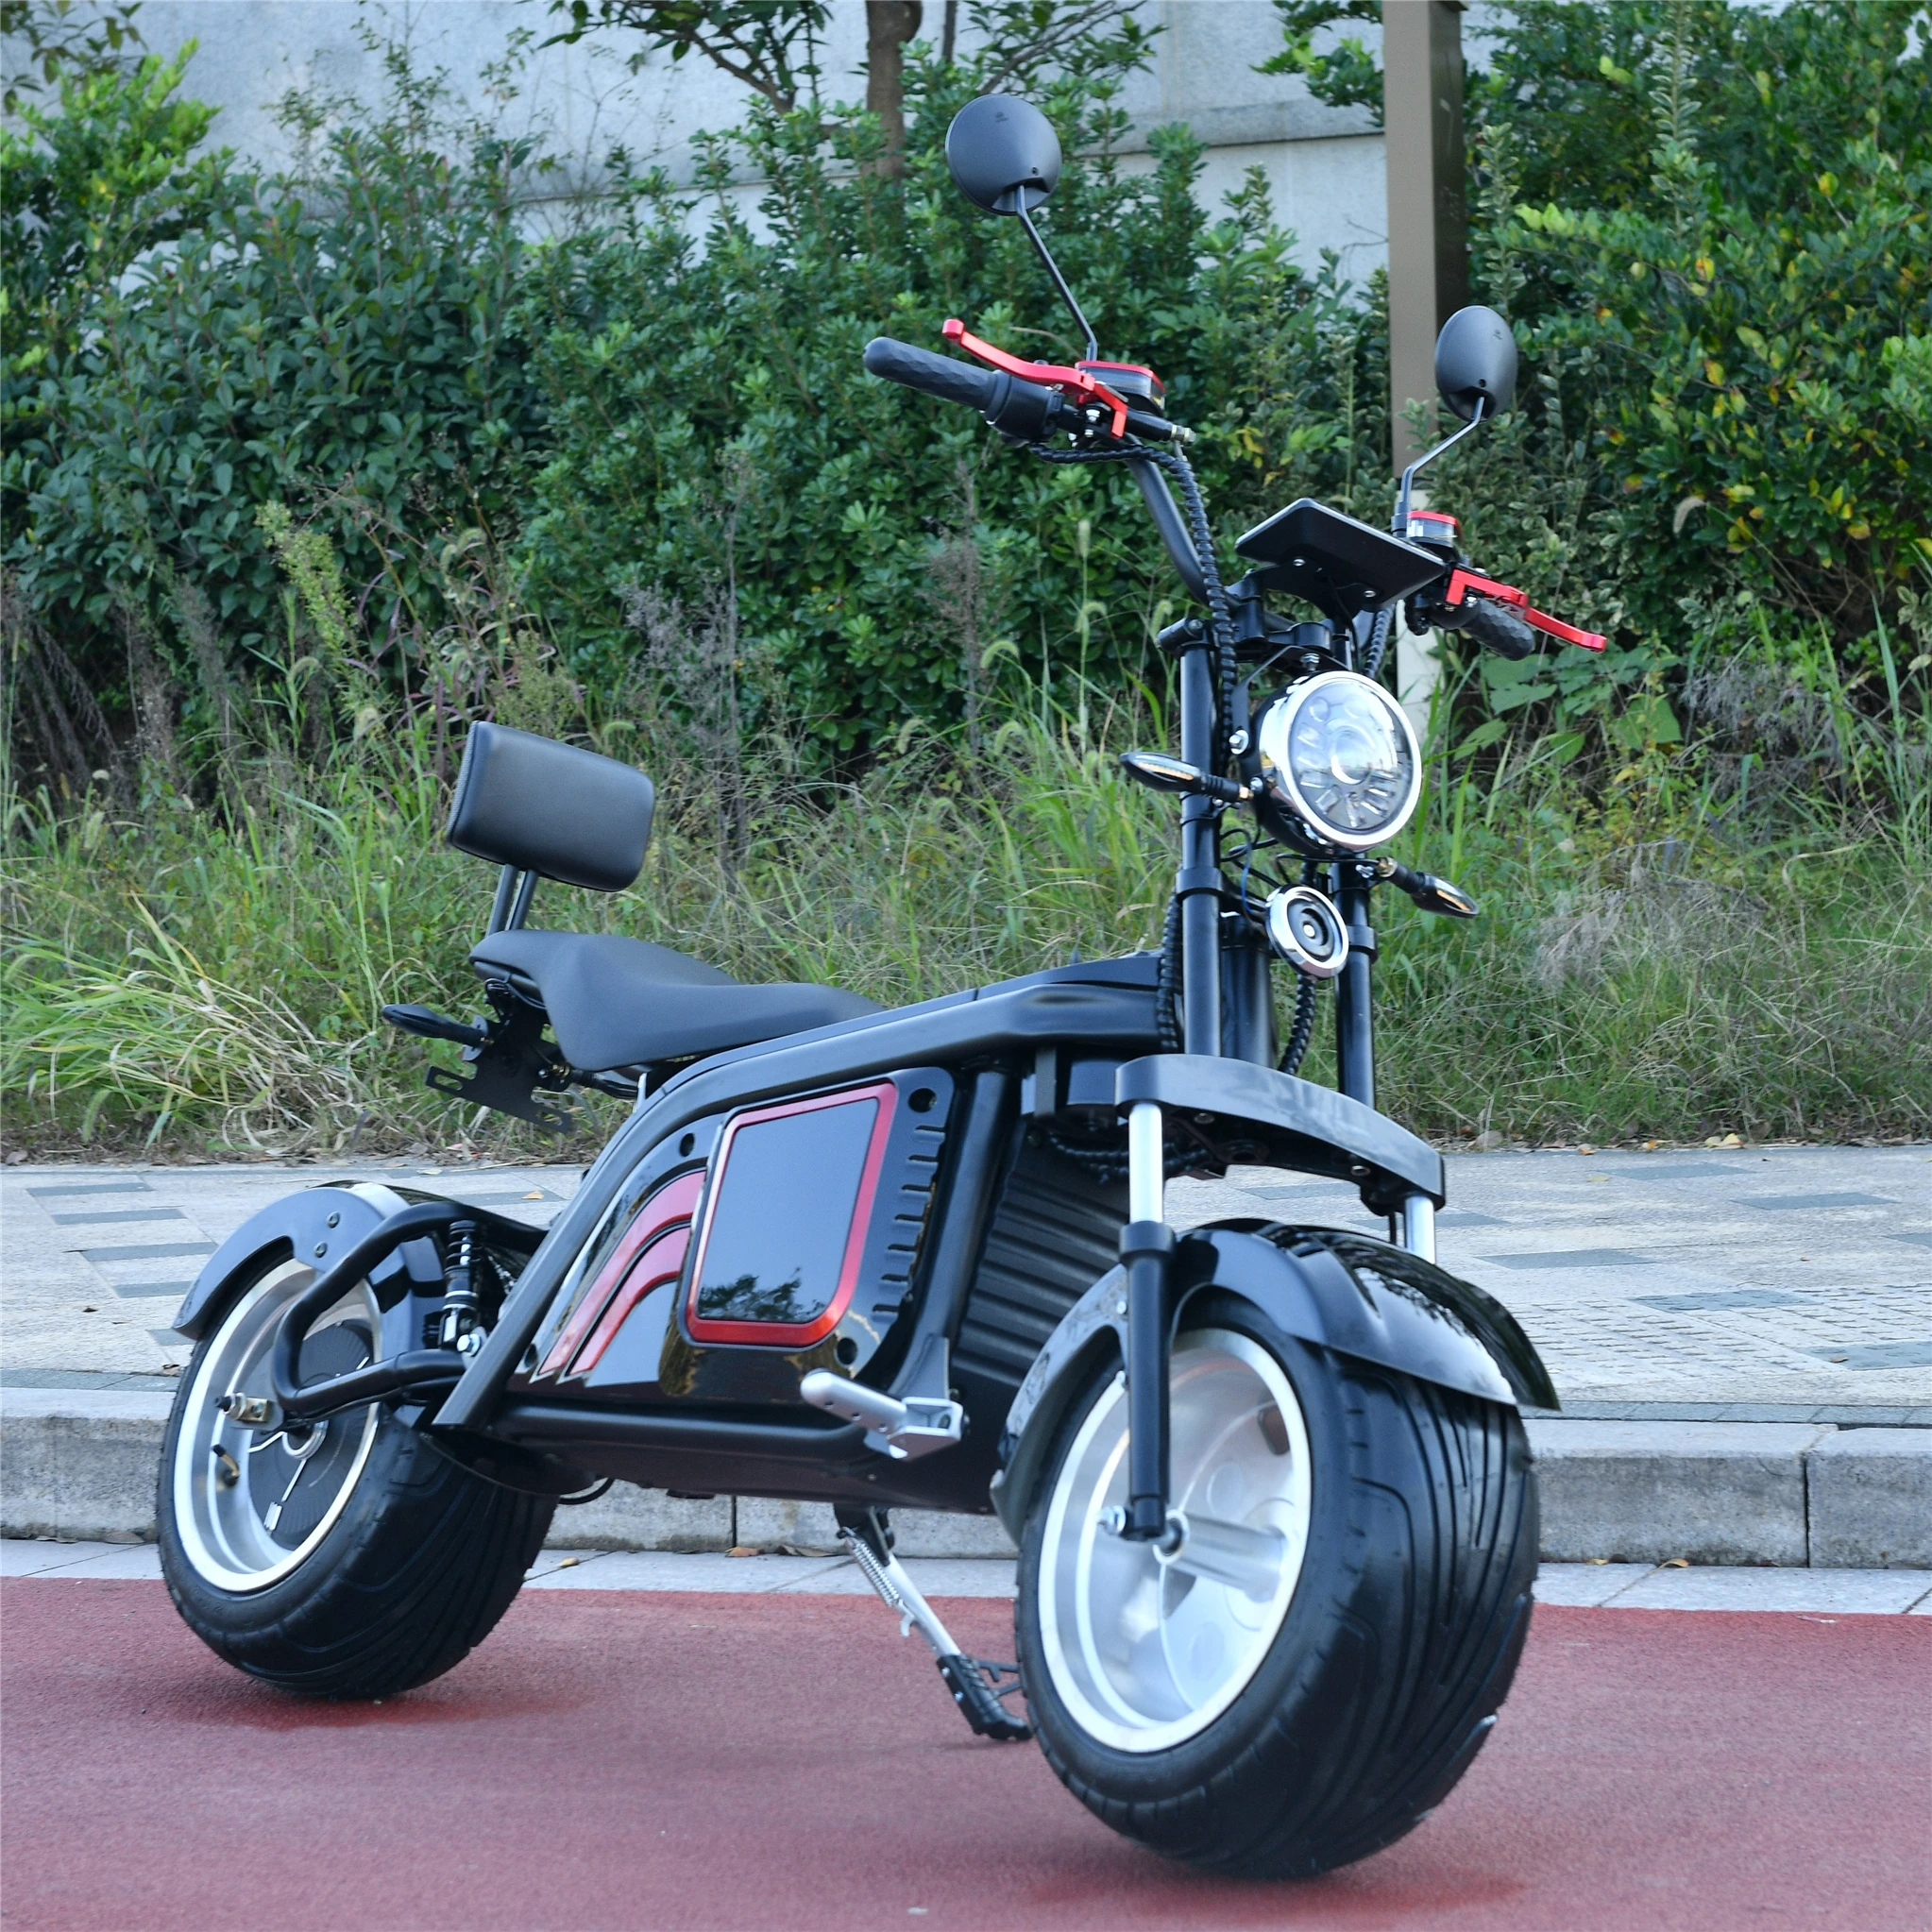 

Stock Citycoco Scooter 800w 1000w 1500w Fat Tire Adult Electric Motorcycle with EEC, Blue red black